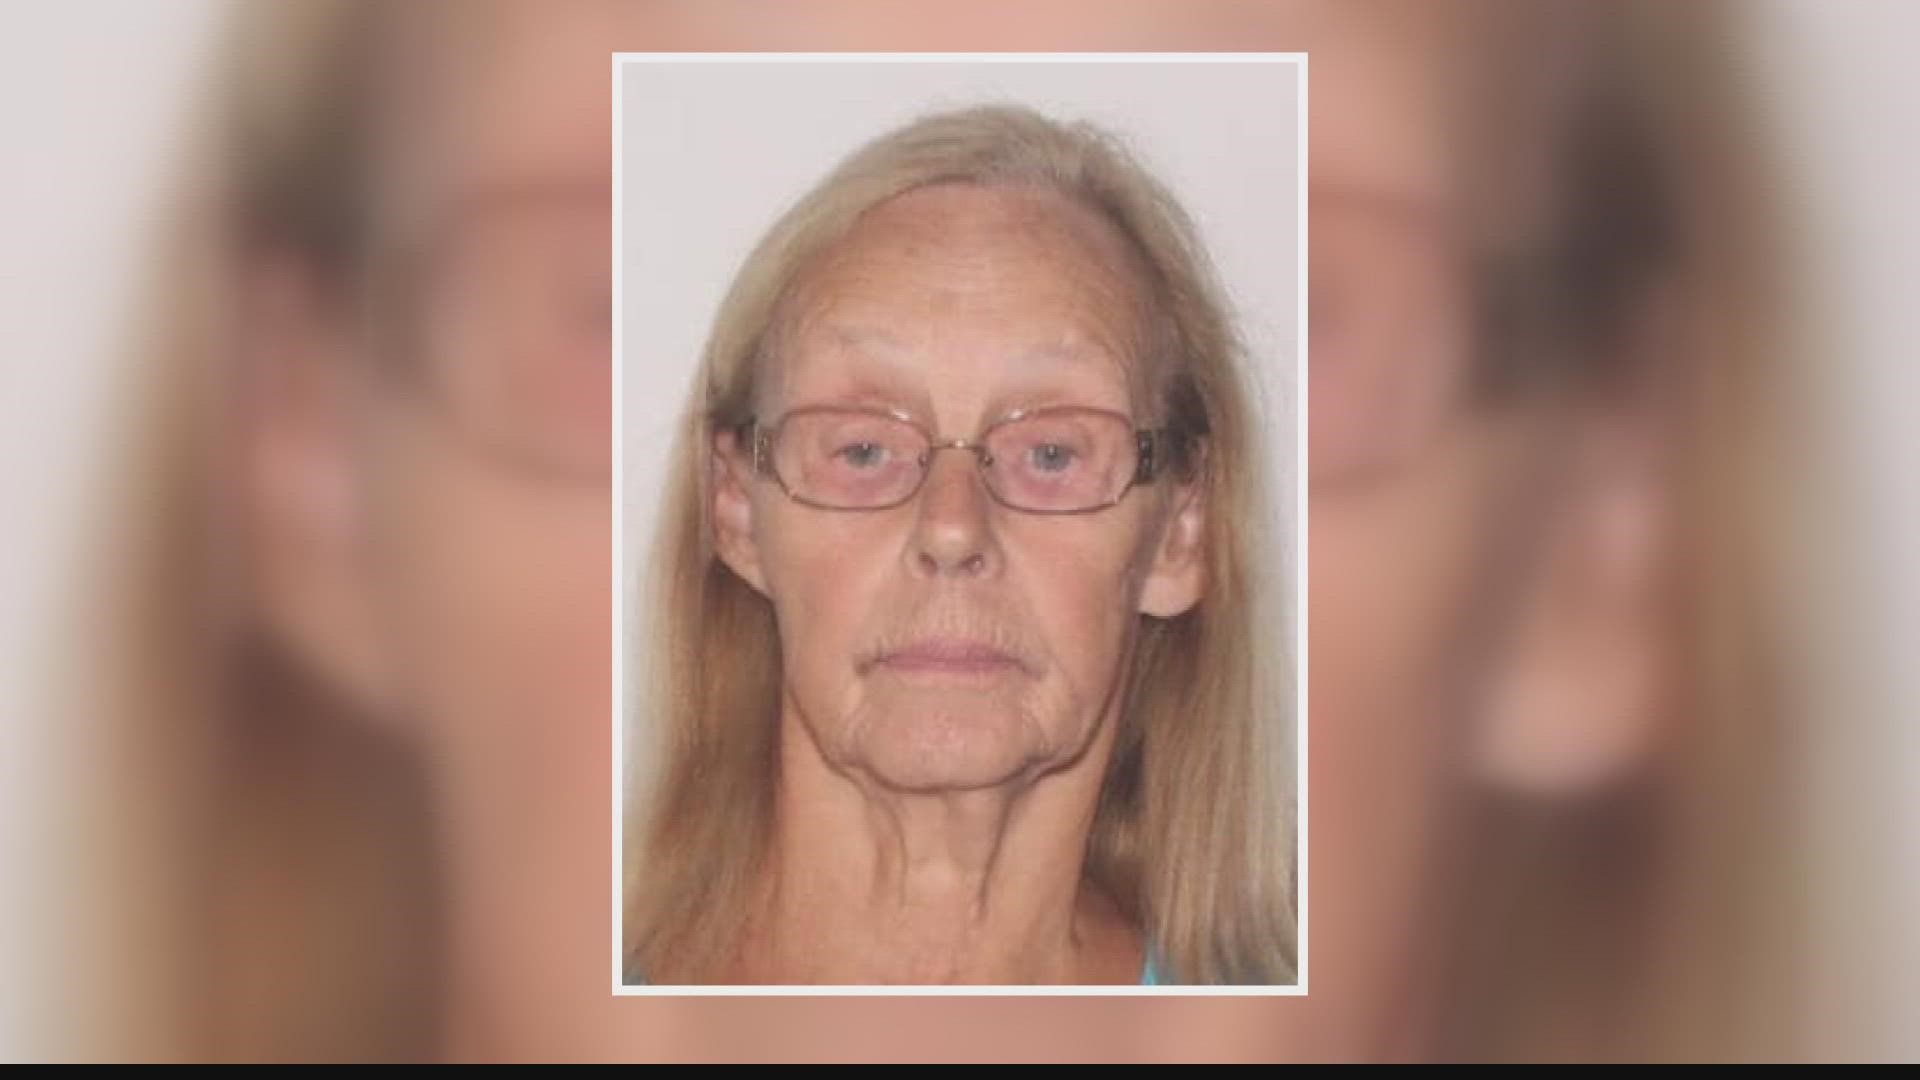 The Baker County Sheriff’s Office is asking for the community’s assistance in locating a missing woman who is suffering from early stages of dementia and Alzheimer’s